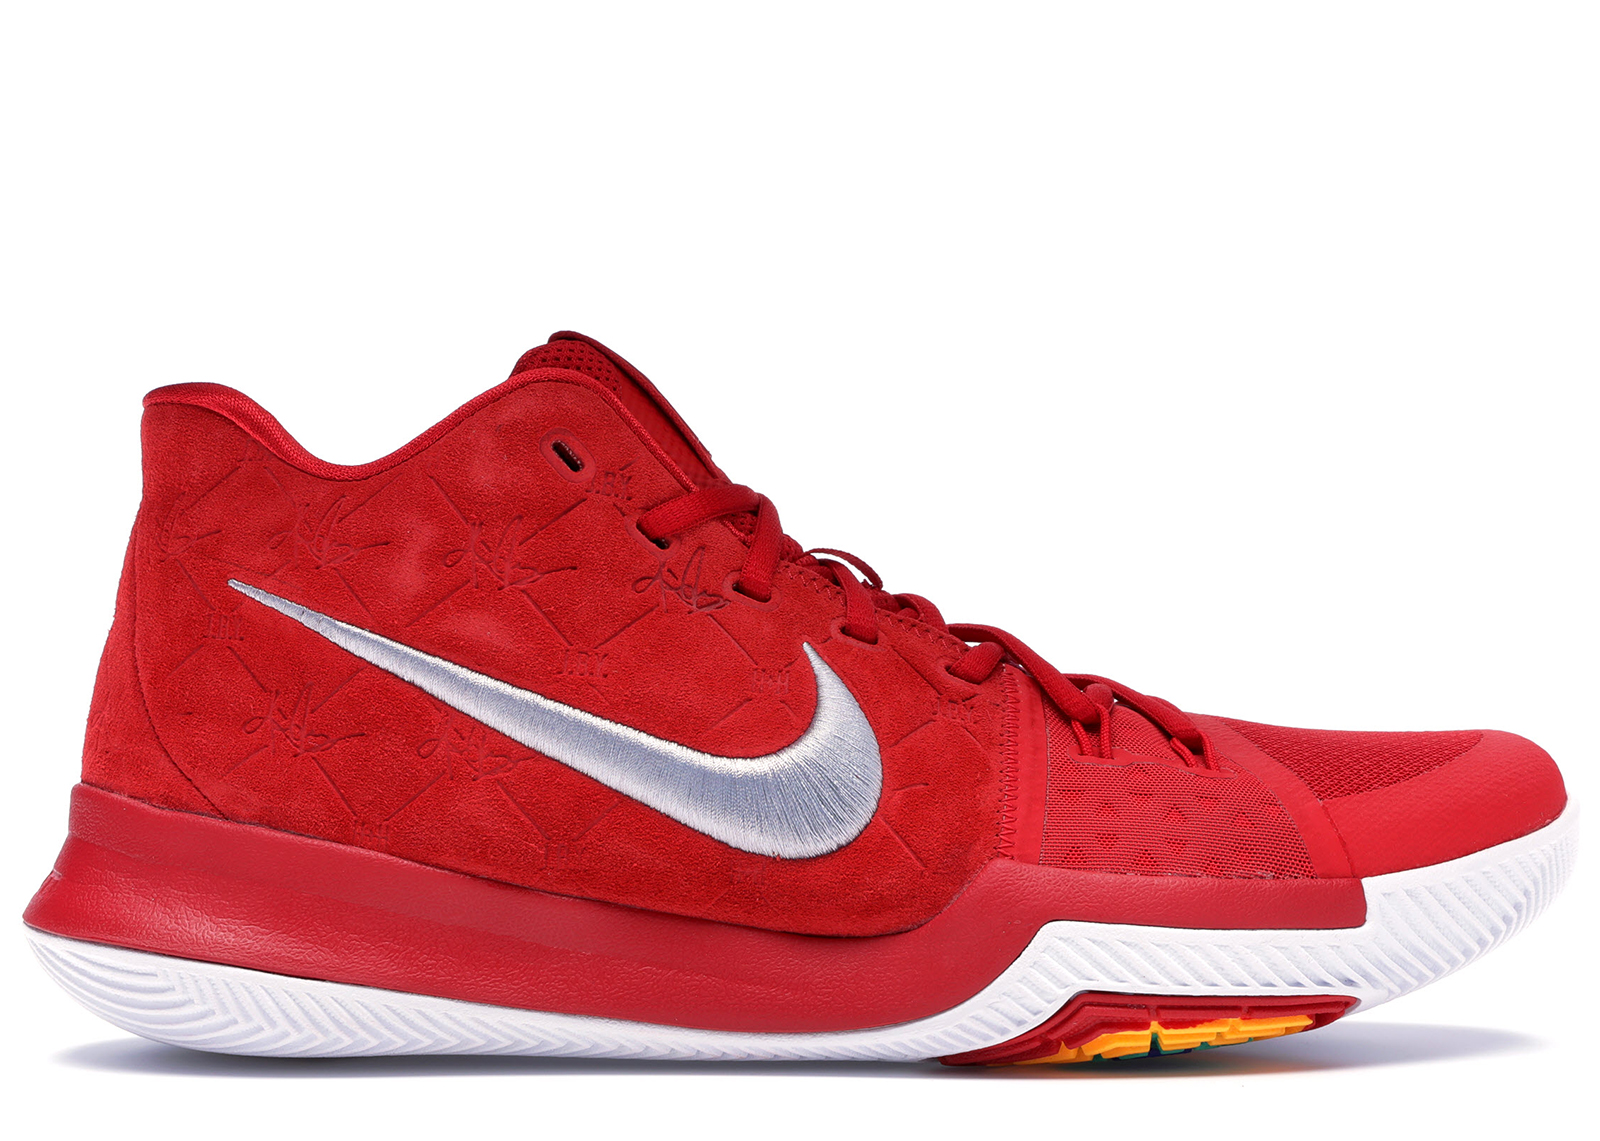 kyrie irving nike shoes red